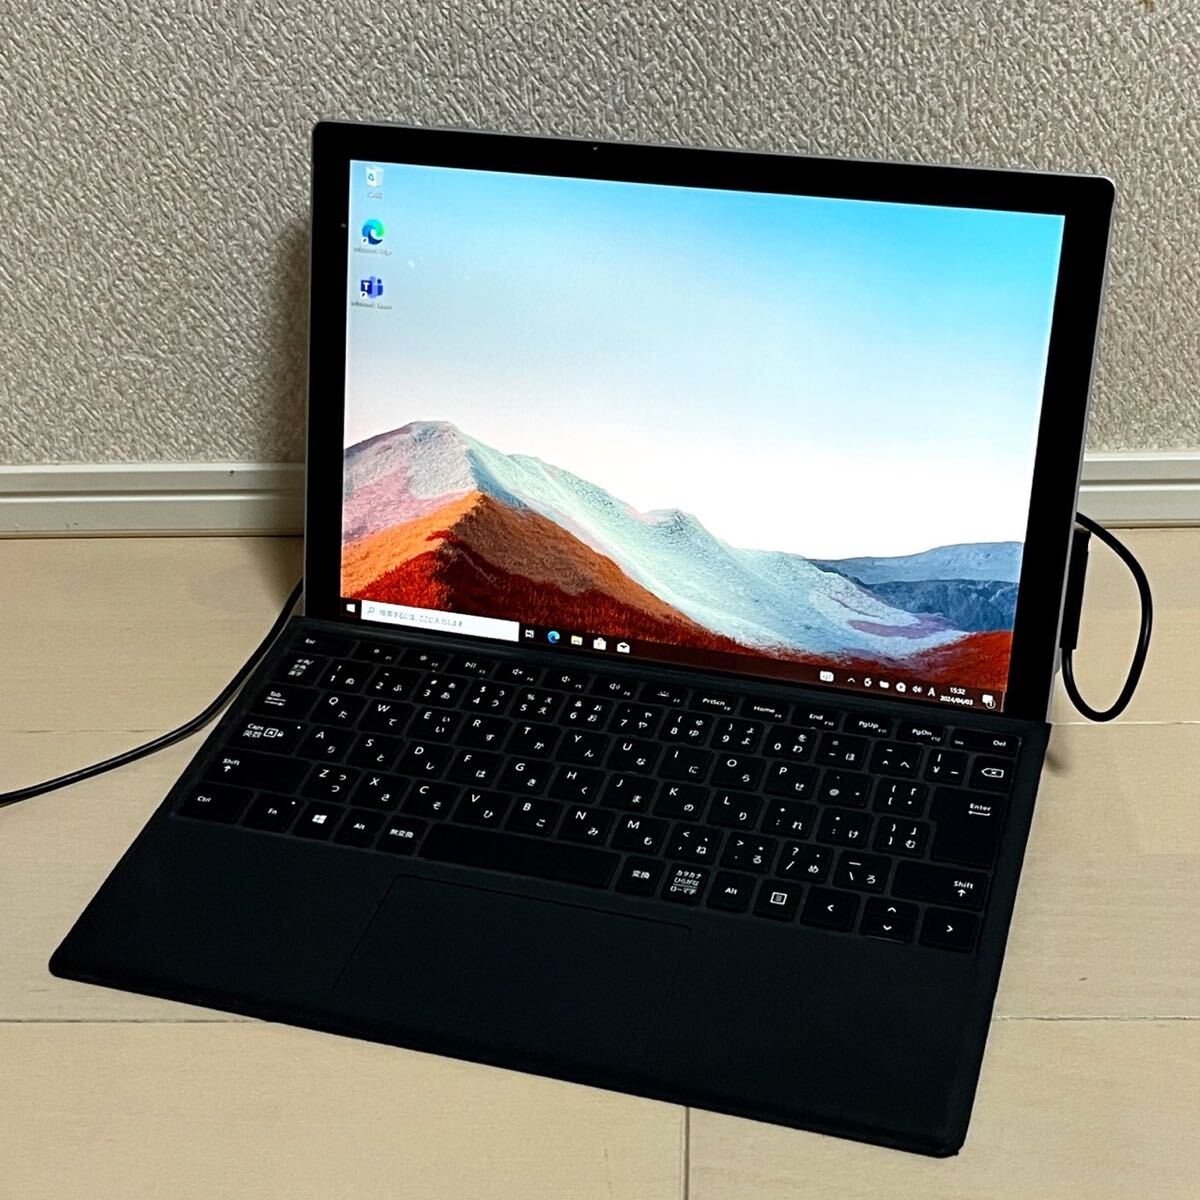 Microsoft タブレットパソコン Surface Pro7(1961) Core i5-1135G7 /2.42GHz / 8GB / SSD256GB / Win10 Pro の画像1